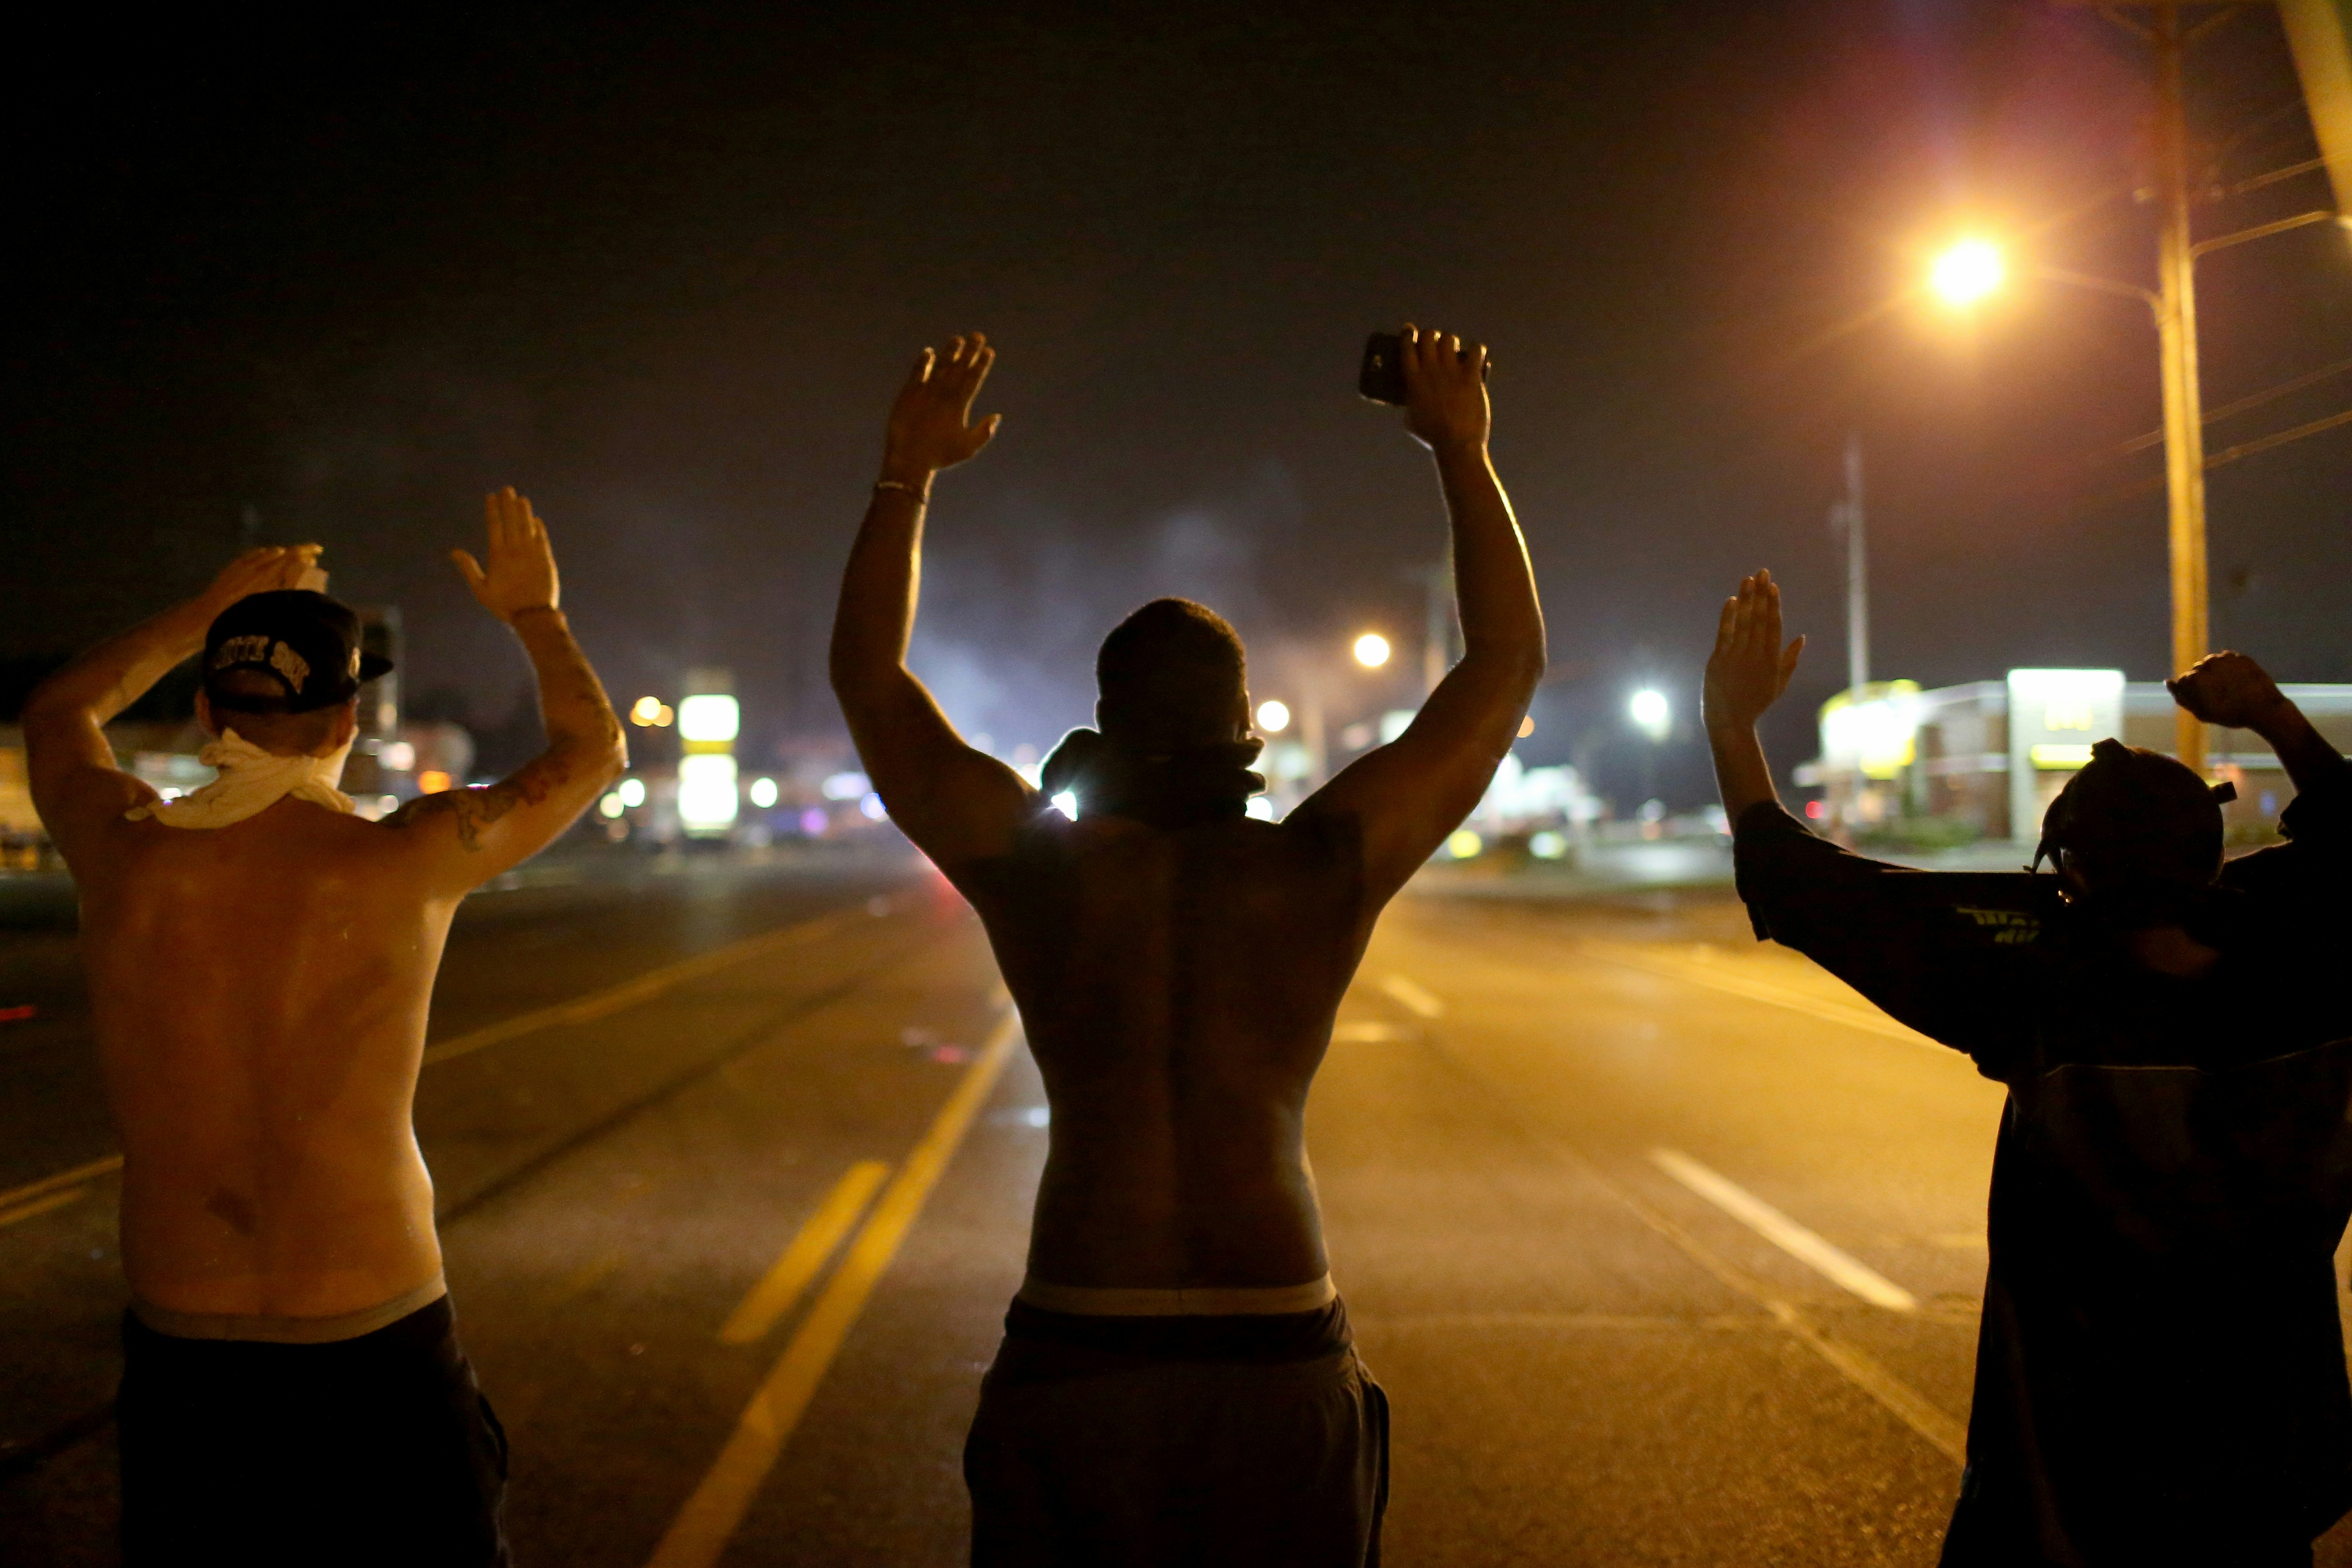 FERGUSON, MO - AUGUST 17:  Demonstrators raise their arms and chant, "Hands up, Don't Shoot", as police clear them from the street as they protest the shooting death of Michael Brown on August 17, 2014 in Ferguson, Missouri. Police sprayed pepper spray, shot smoke, gas and flash grenades as violent outbreaks have taken place in Ferguson since the shooting death of Michael Brown by a Ferguson police officer on August 9th.  (Photo by Joe Raedle/Getty Images)